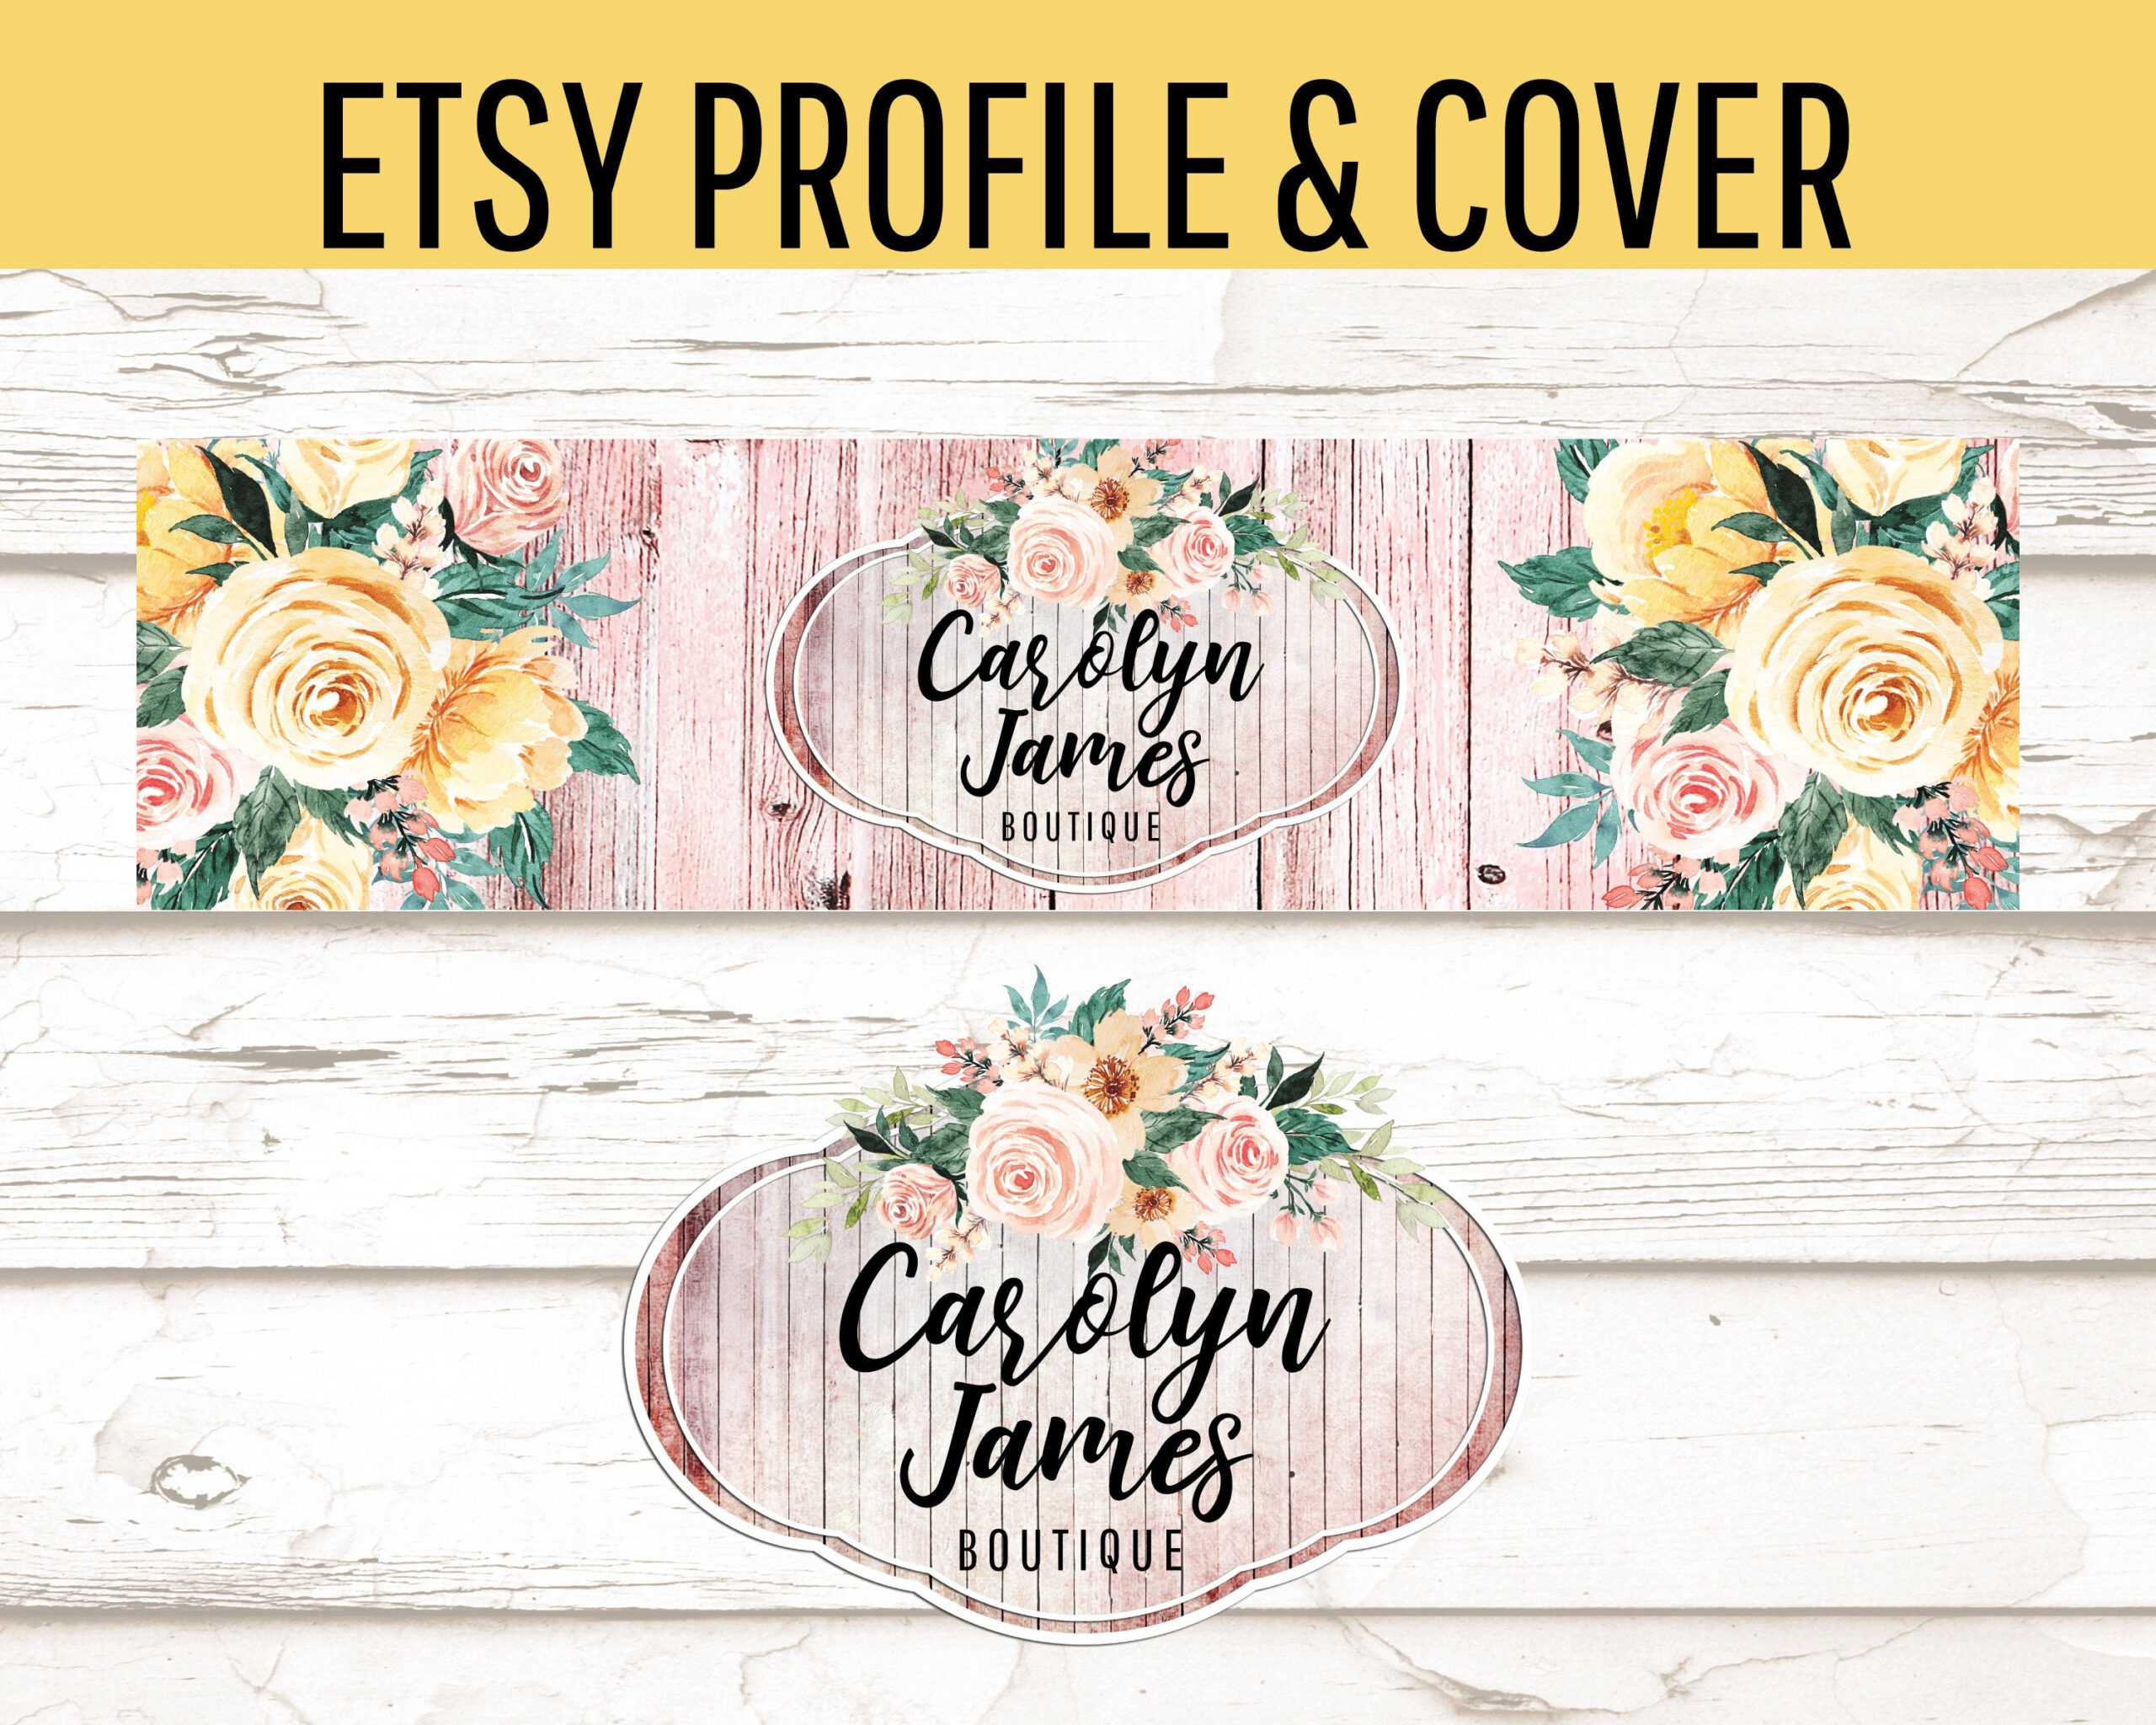 Etsy Shop Set, Rustic Wood Etsy Banner, Pink And Yellow Floral Etsy Cover  Photo, Distressed Wood Etsy Shop Banner Design, Custom Cover Photo Regarding Free Etsy Banner Template